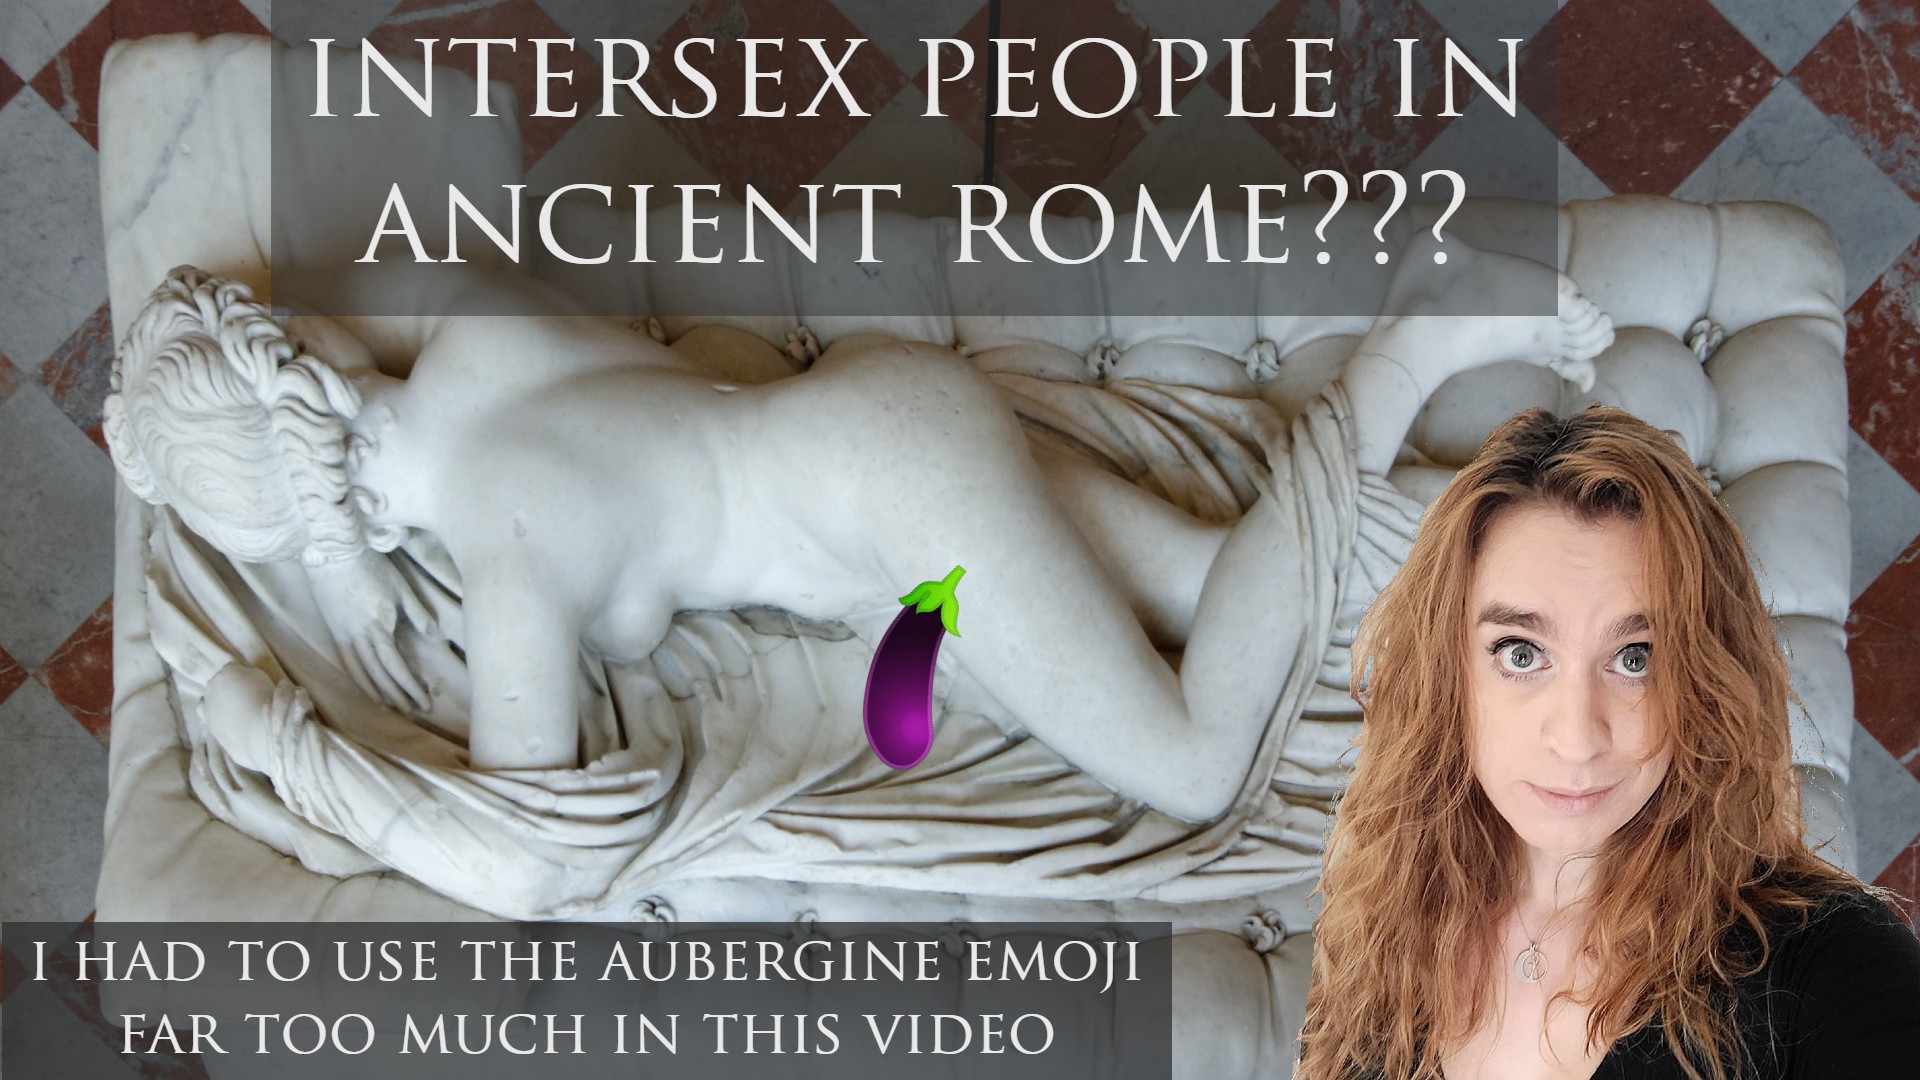 Sophie in bottom right, overtop of a photo of Bernini's Sleeping Hermaphroditus sculpture, with an aubergine emoji covering the naughty bits. two text overlays say "intersex people in ancient Rome???" and "I had to use the aubergine emoji far too much in this video"